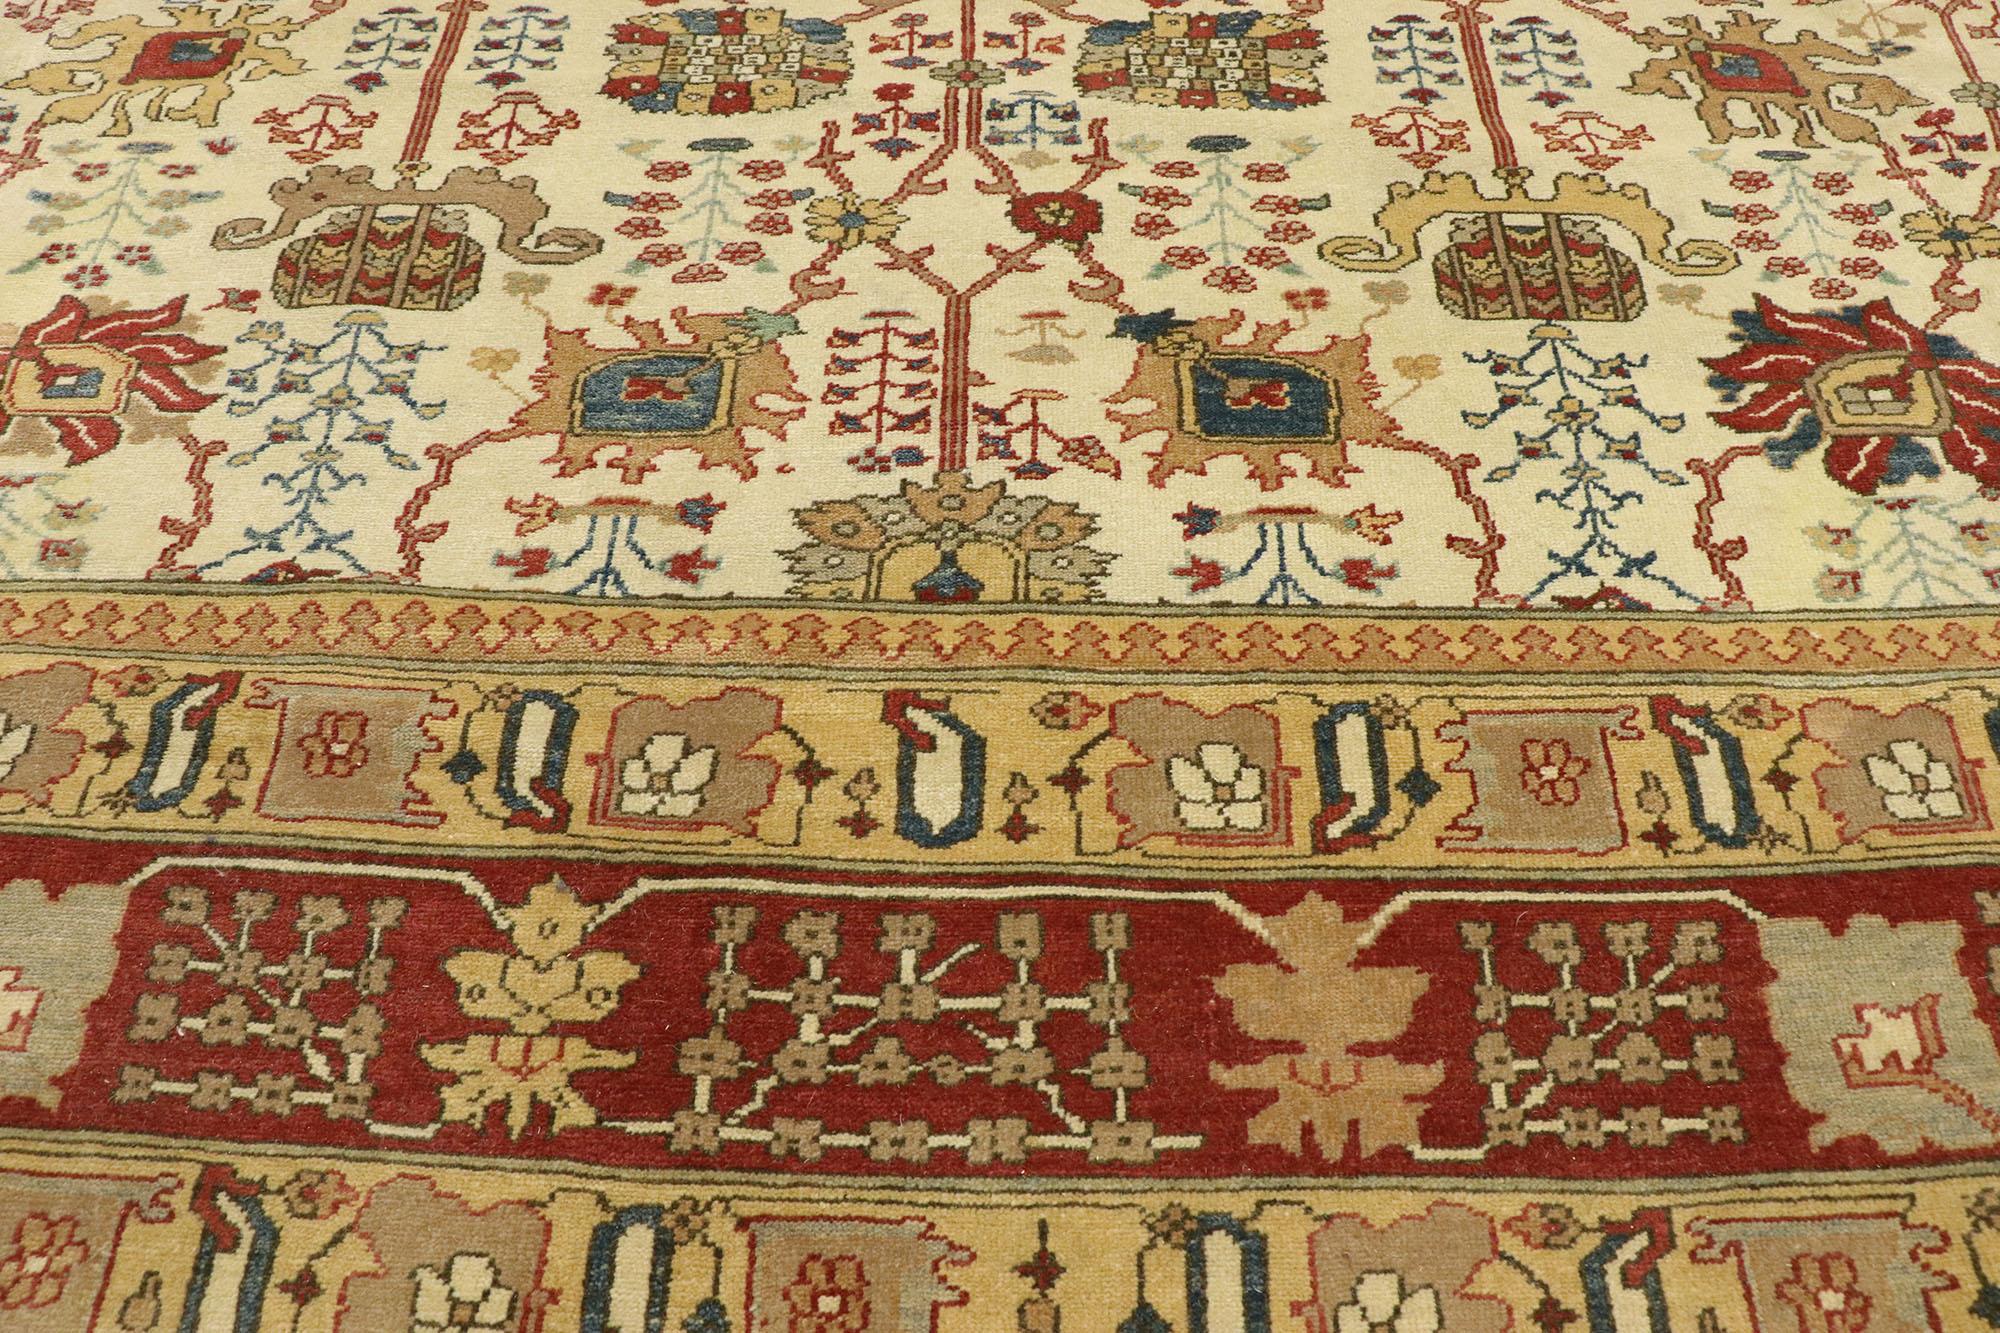 Hand-Knotted Vintage Turkish Rug with Arts & Crafts Style Inspired by William Morris